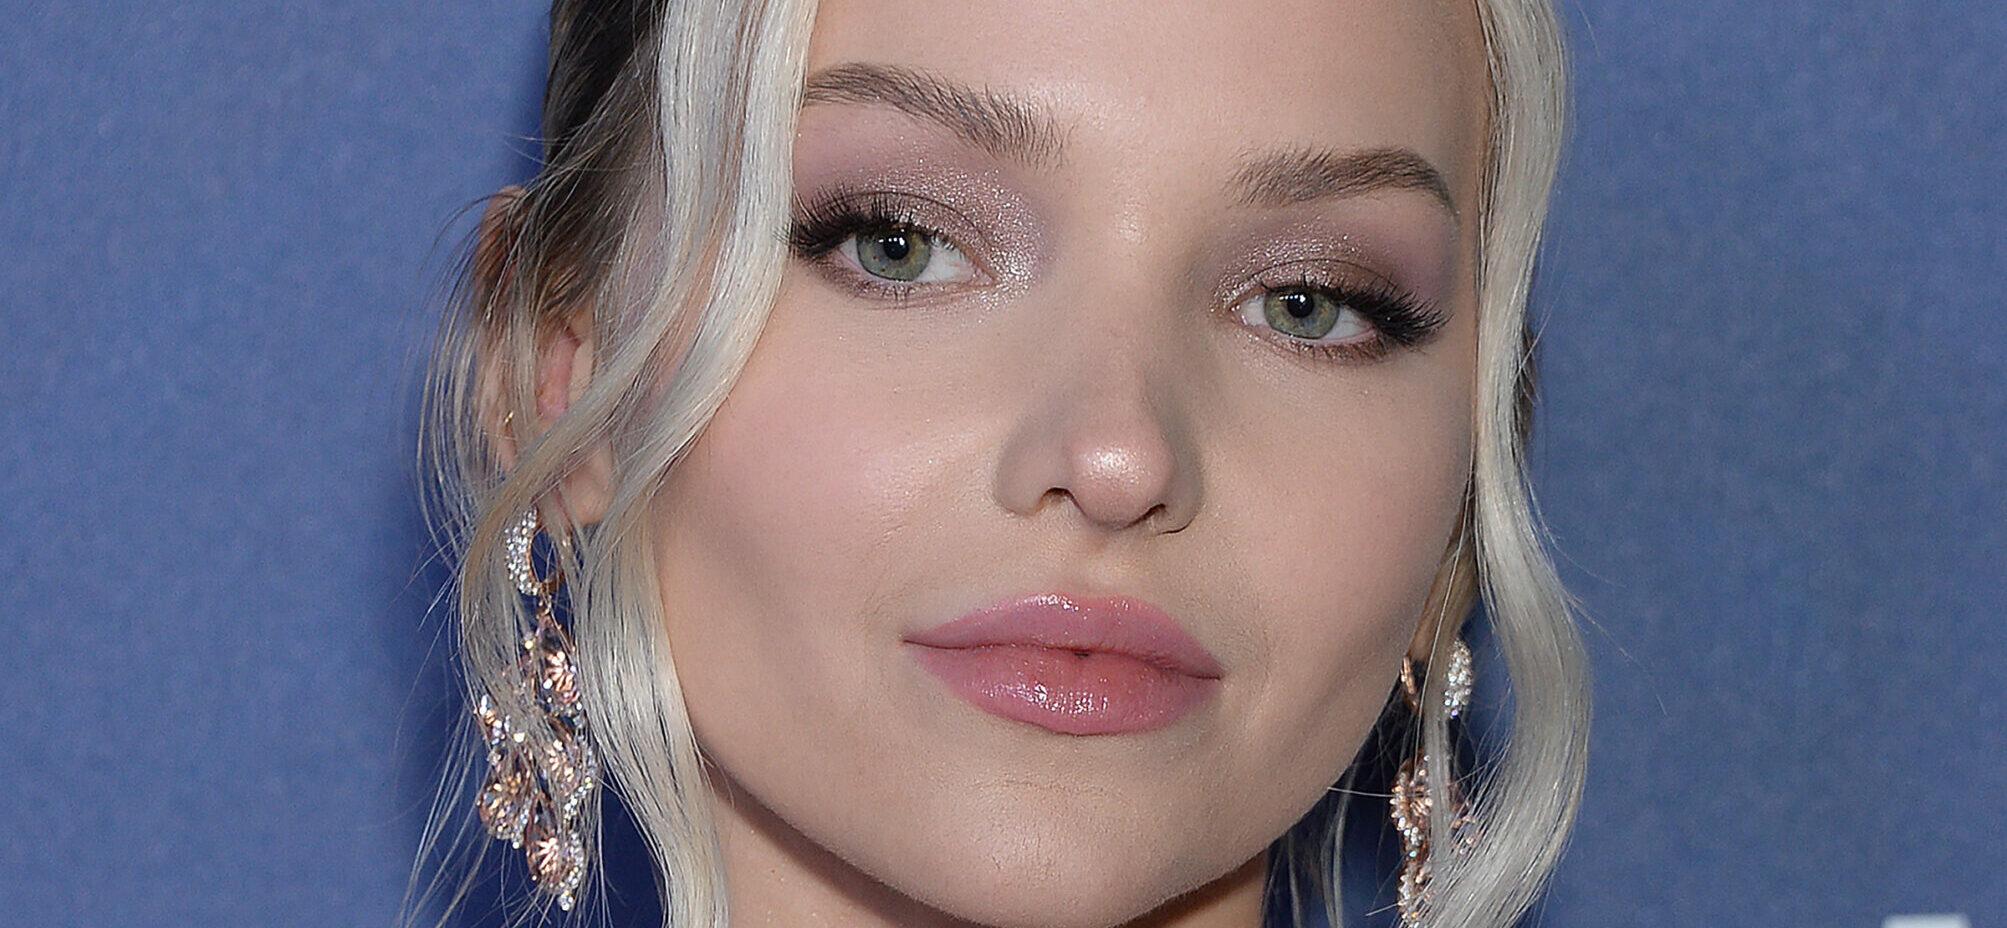 Dove Cameron Stuns In A Sheer White Nightgown While Crying: ‘I’ve Never Looked More Like Myself To Me’